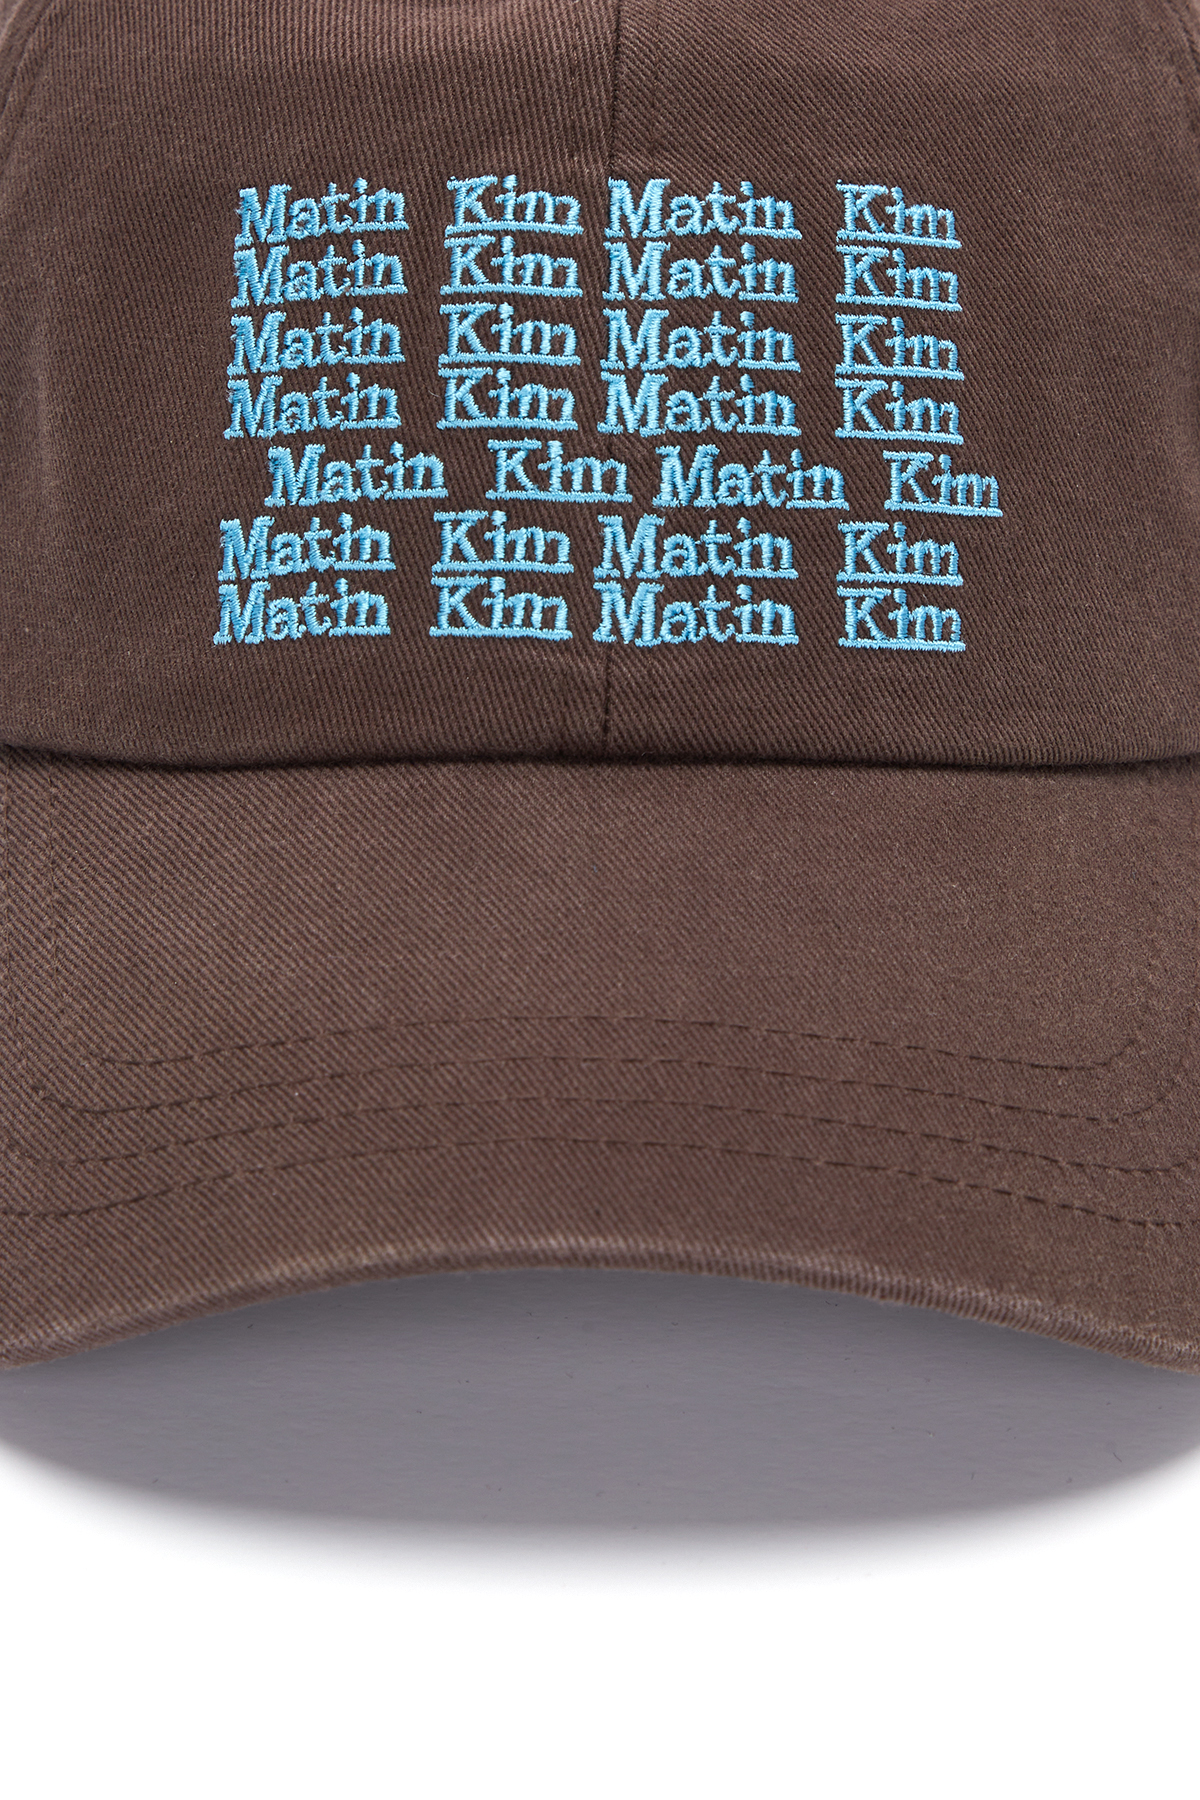 LETTERING BALL CAP IN BROWN